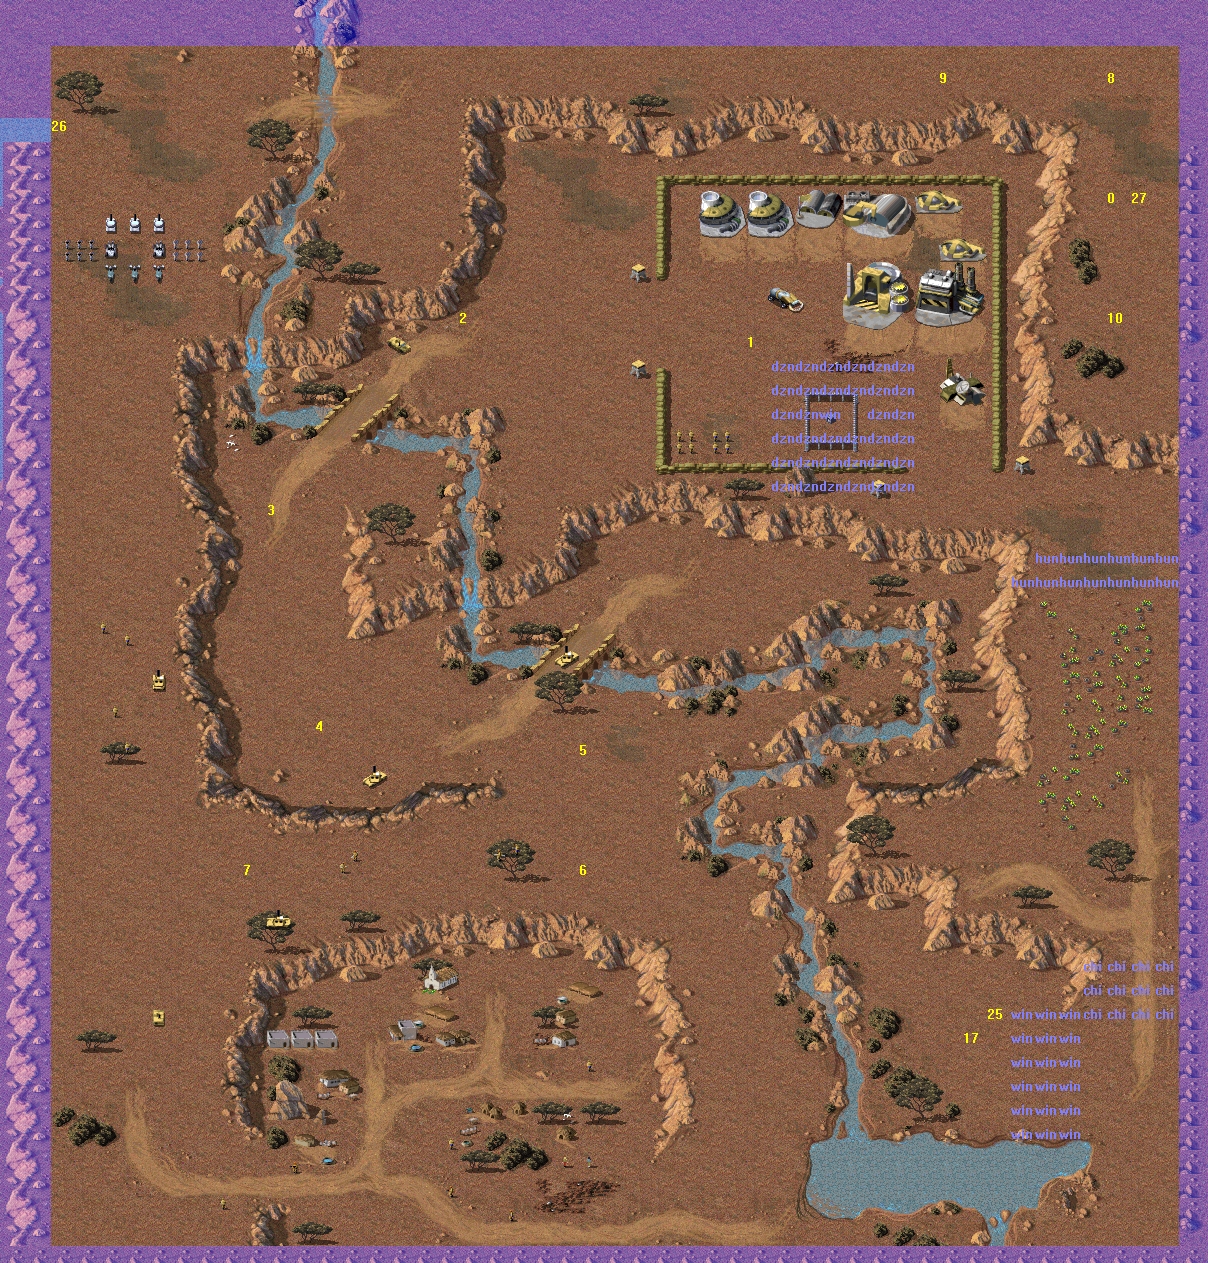 command and conquer maps free download